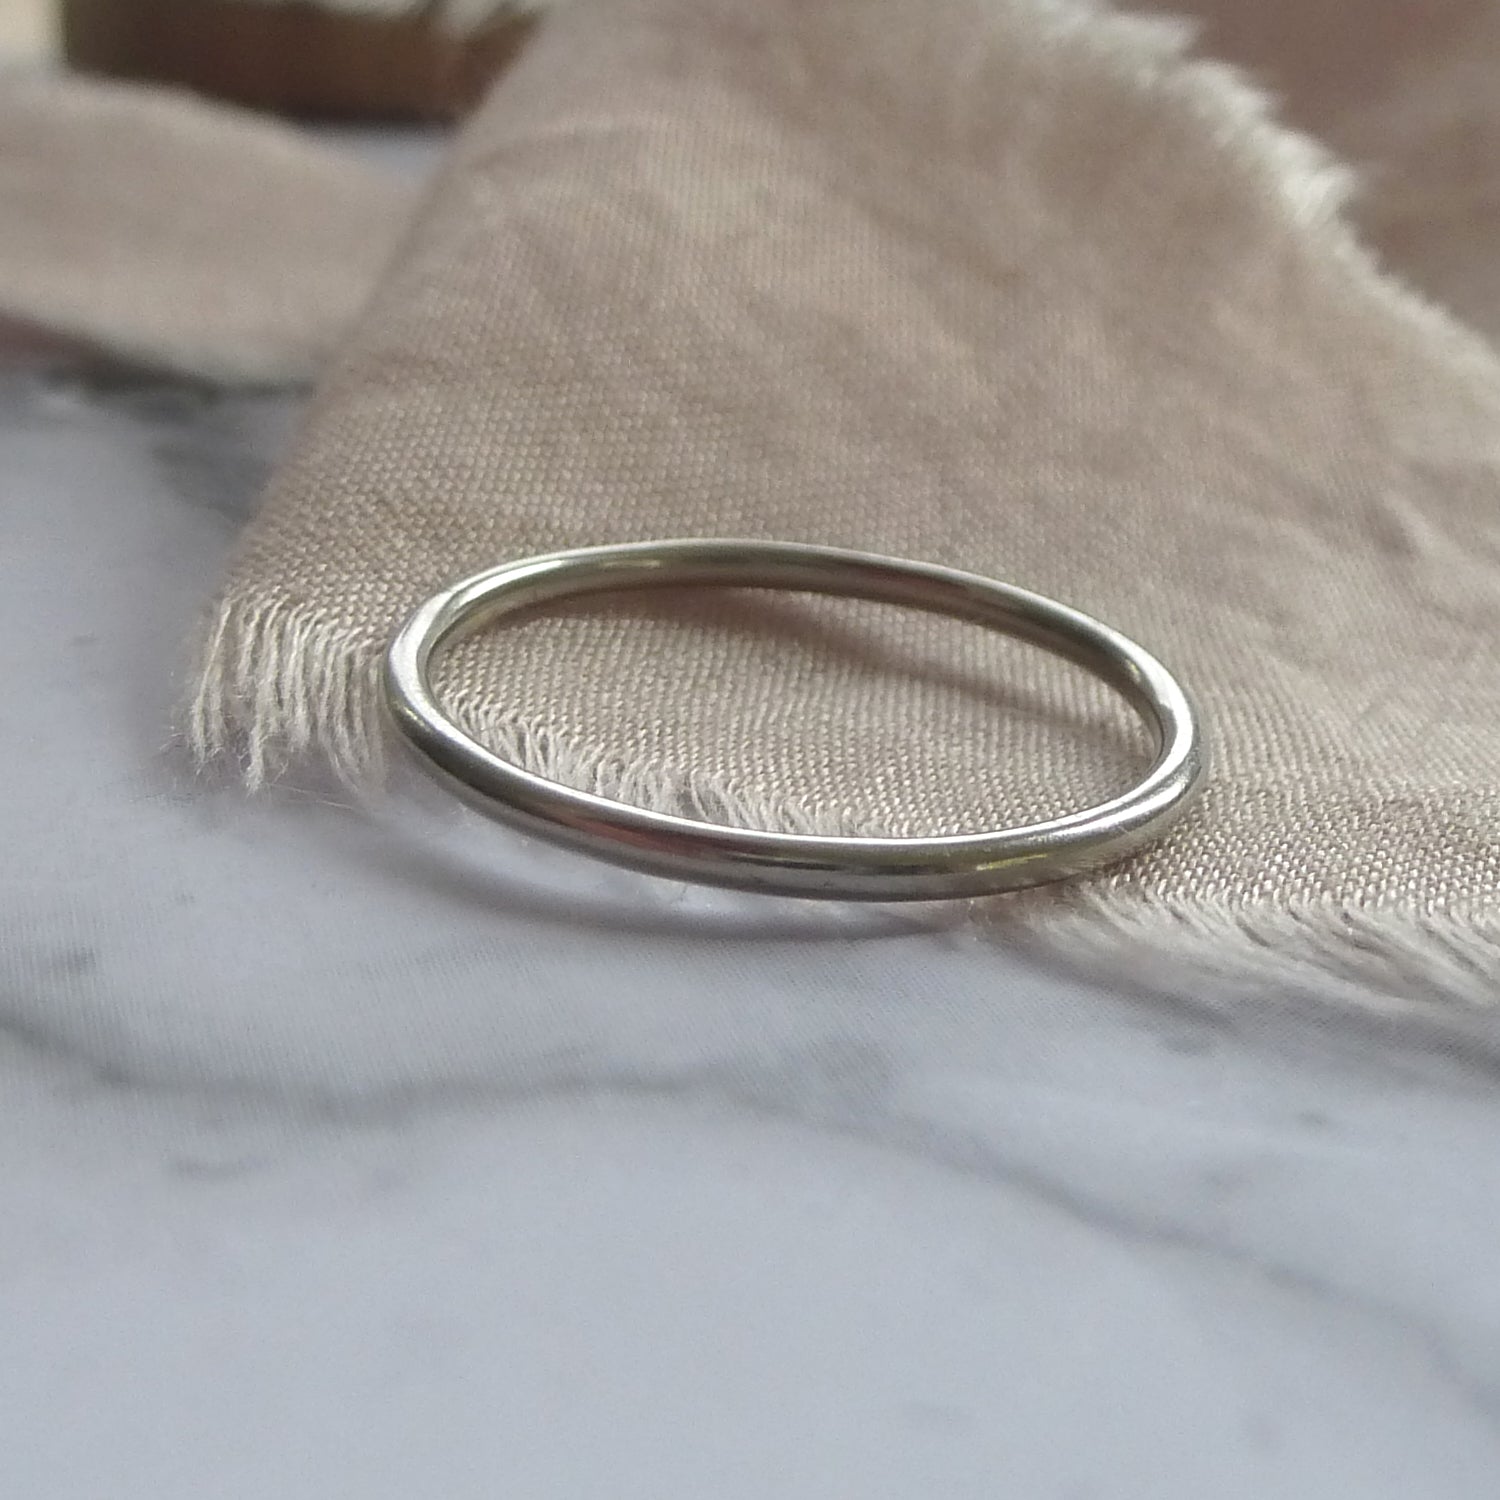 1.2mm band in 18ct white gold, smooth finish